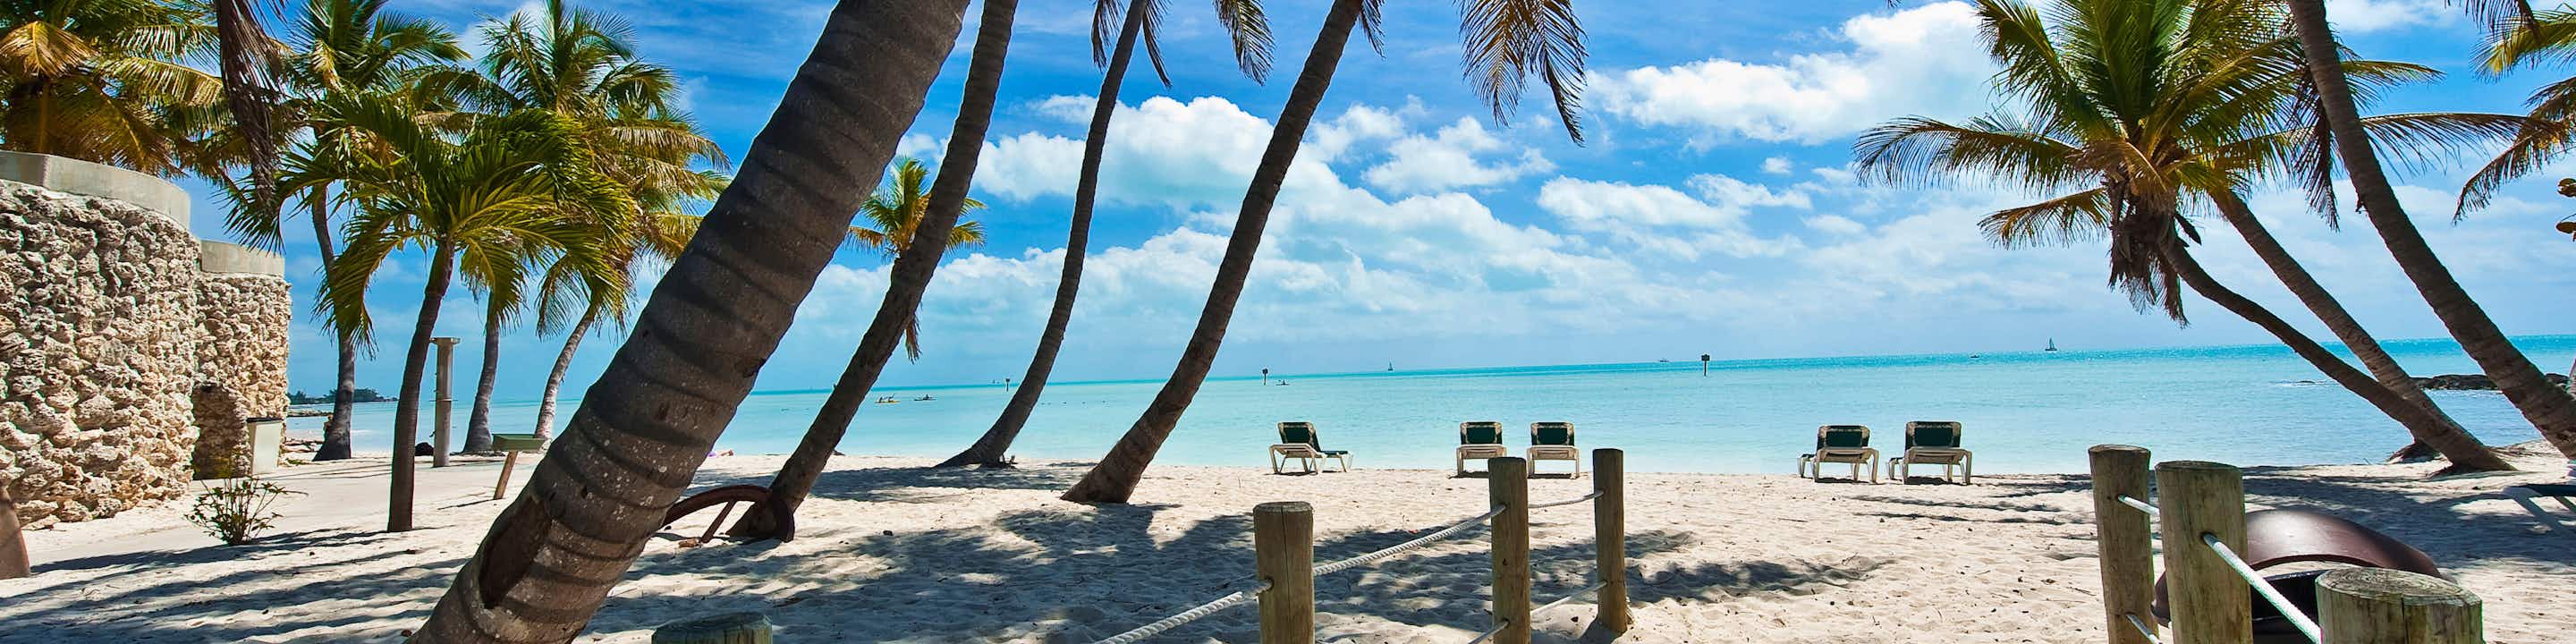 THE 25 BEST Cruises to Key West, FL 2021 (with Prices) Key West